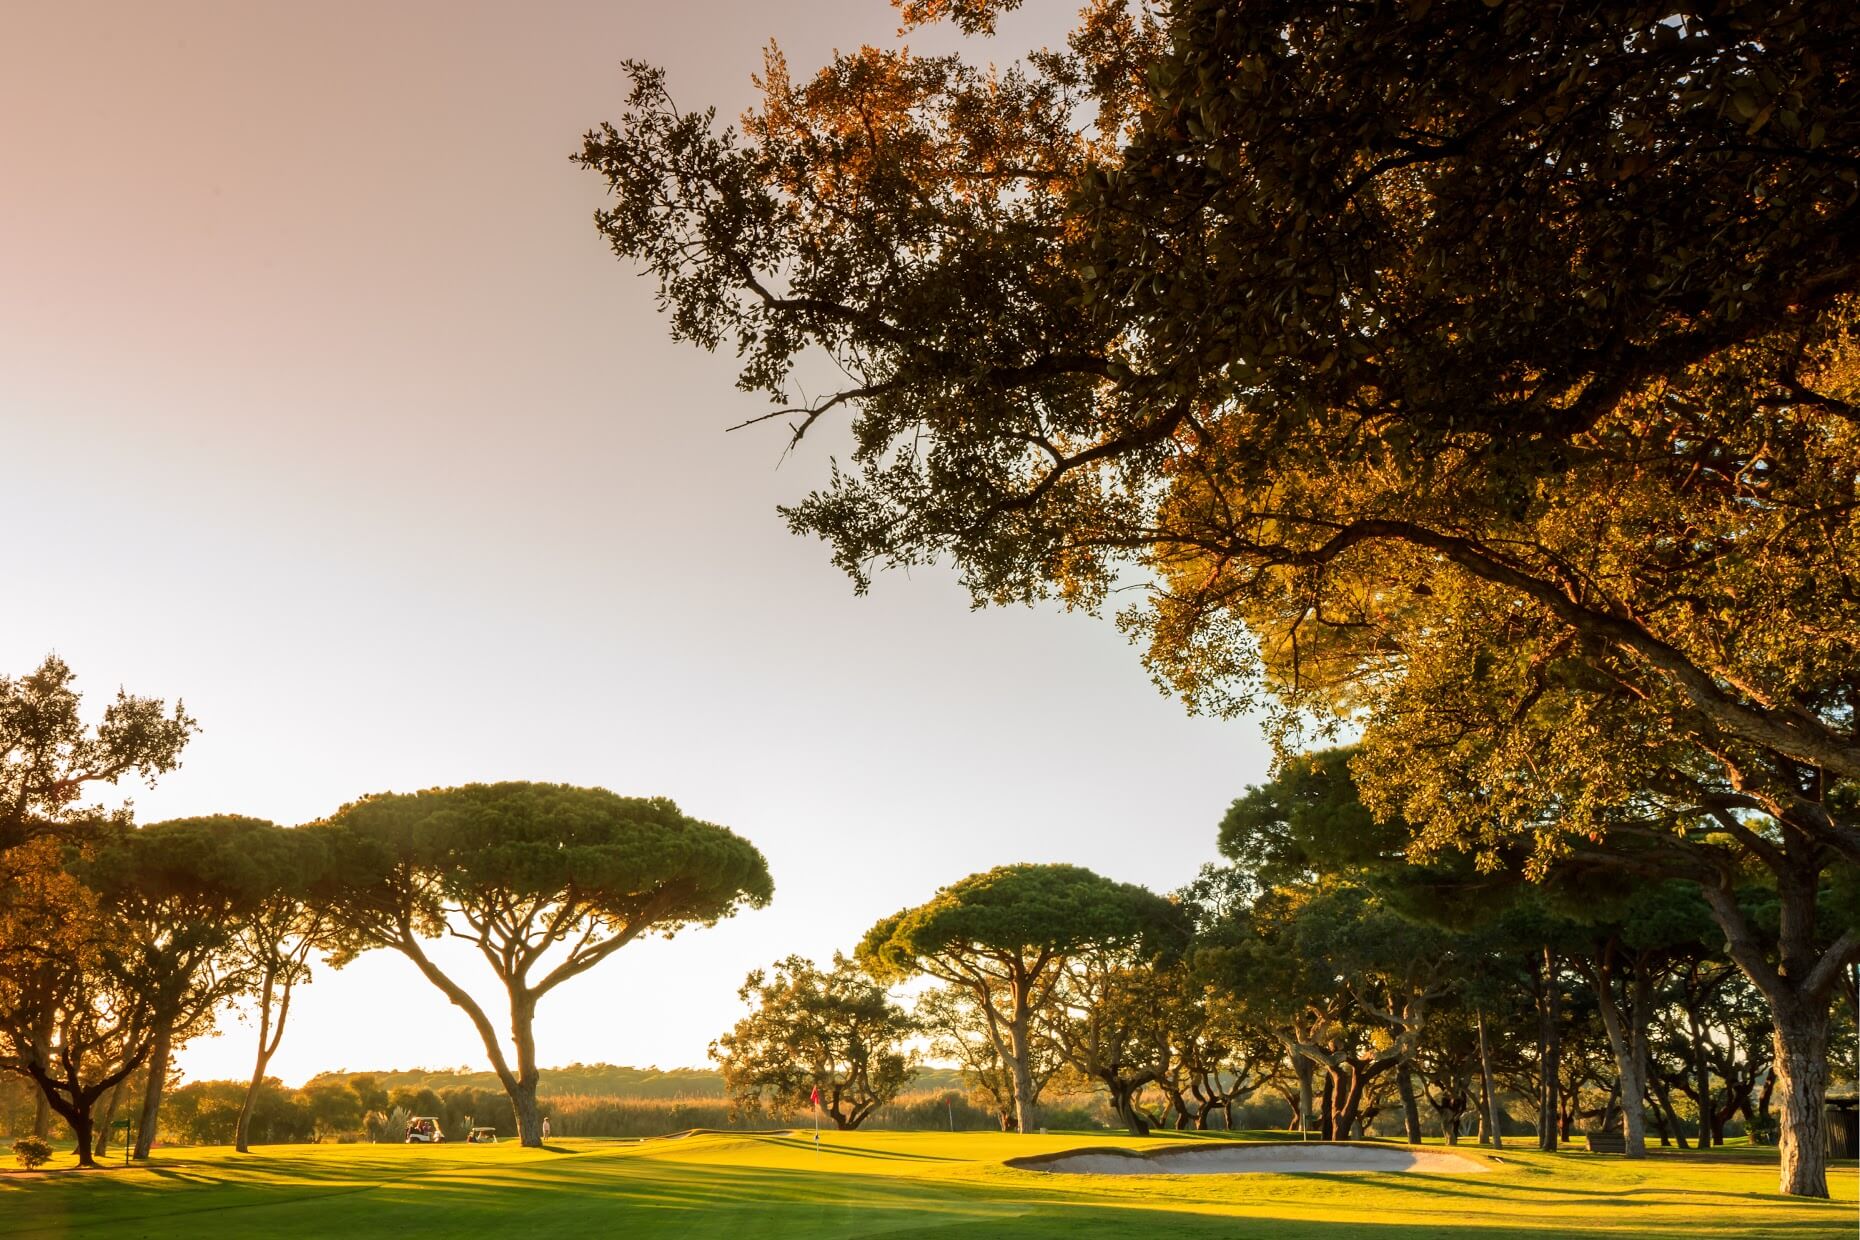 How many golf courses are there in Majorca?